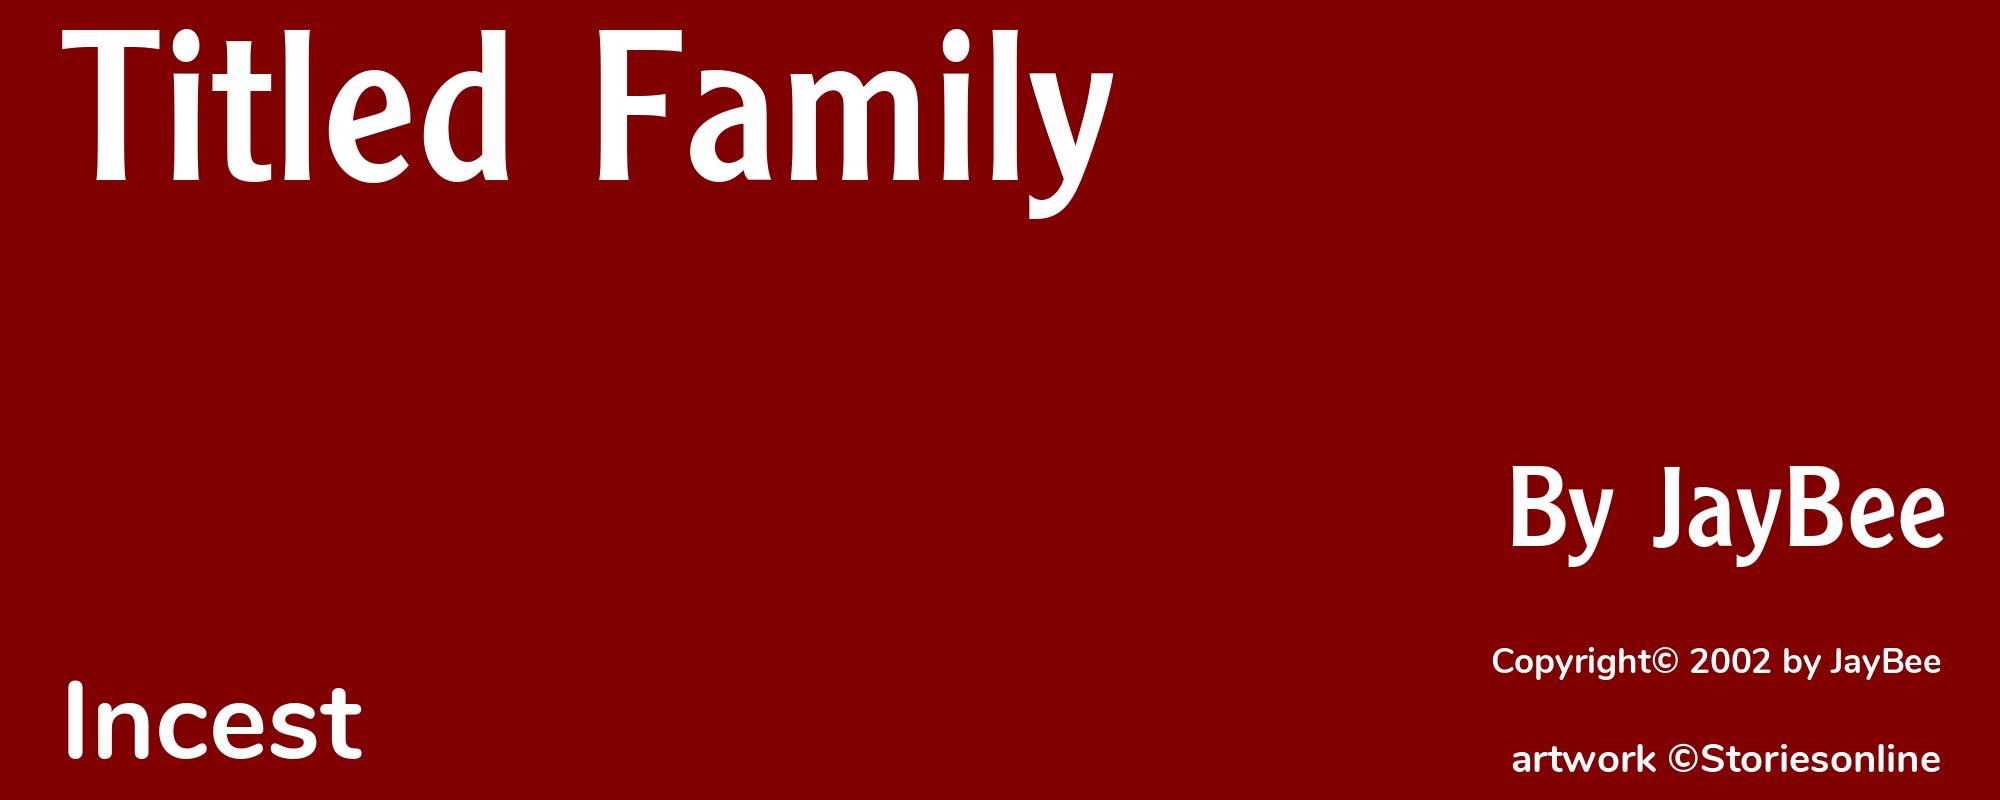 Titled Family - Cover